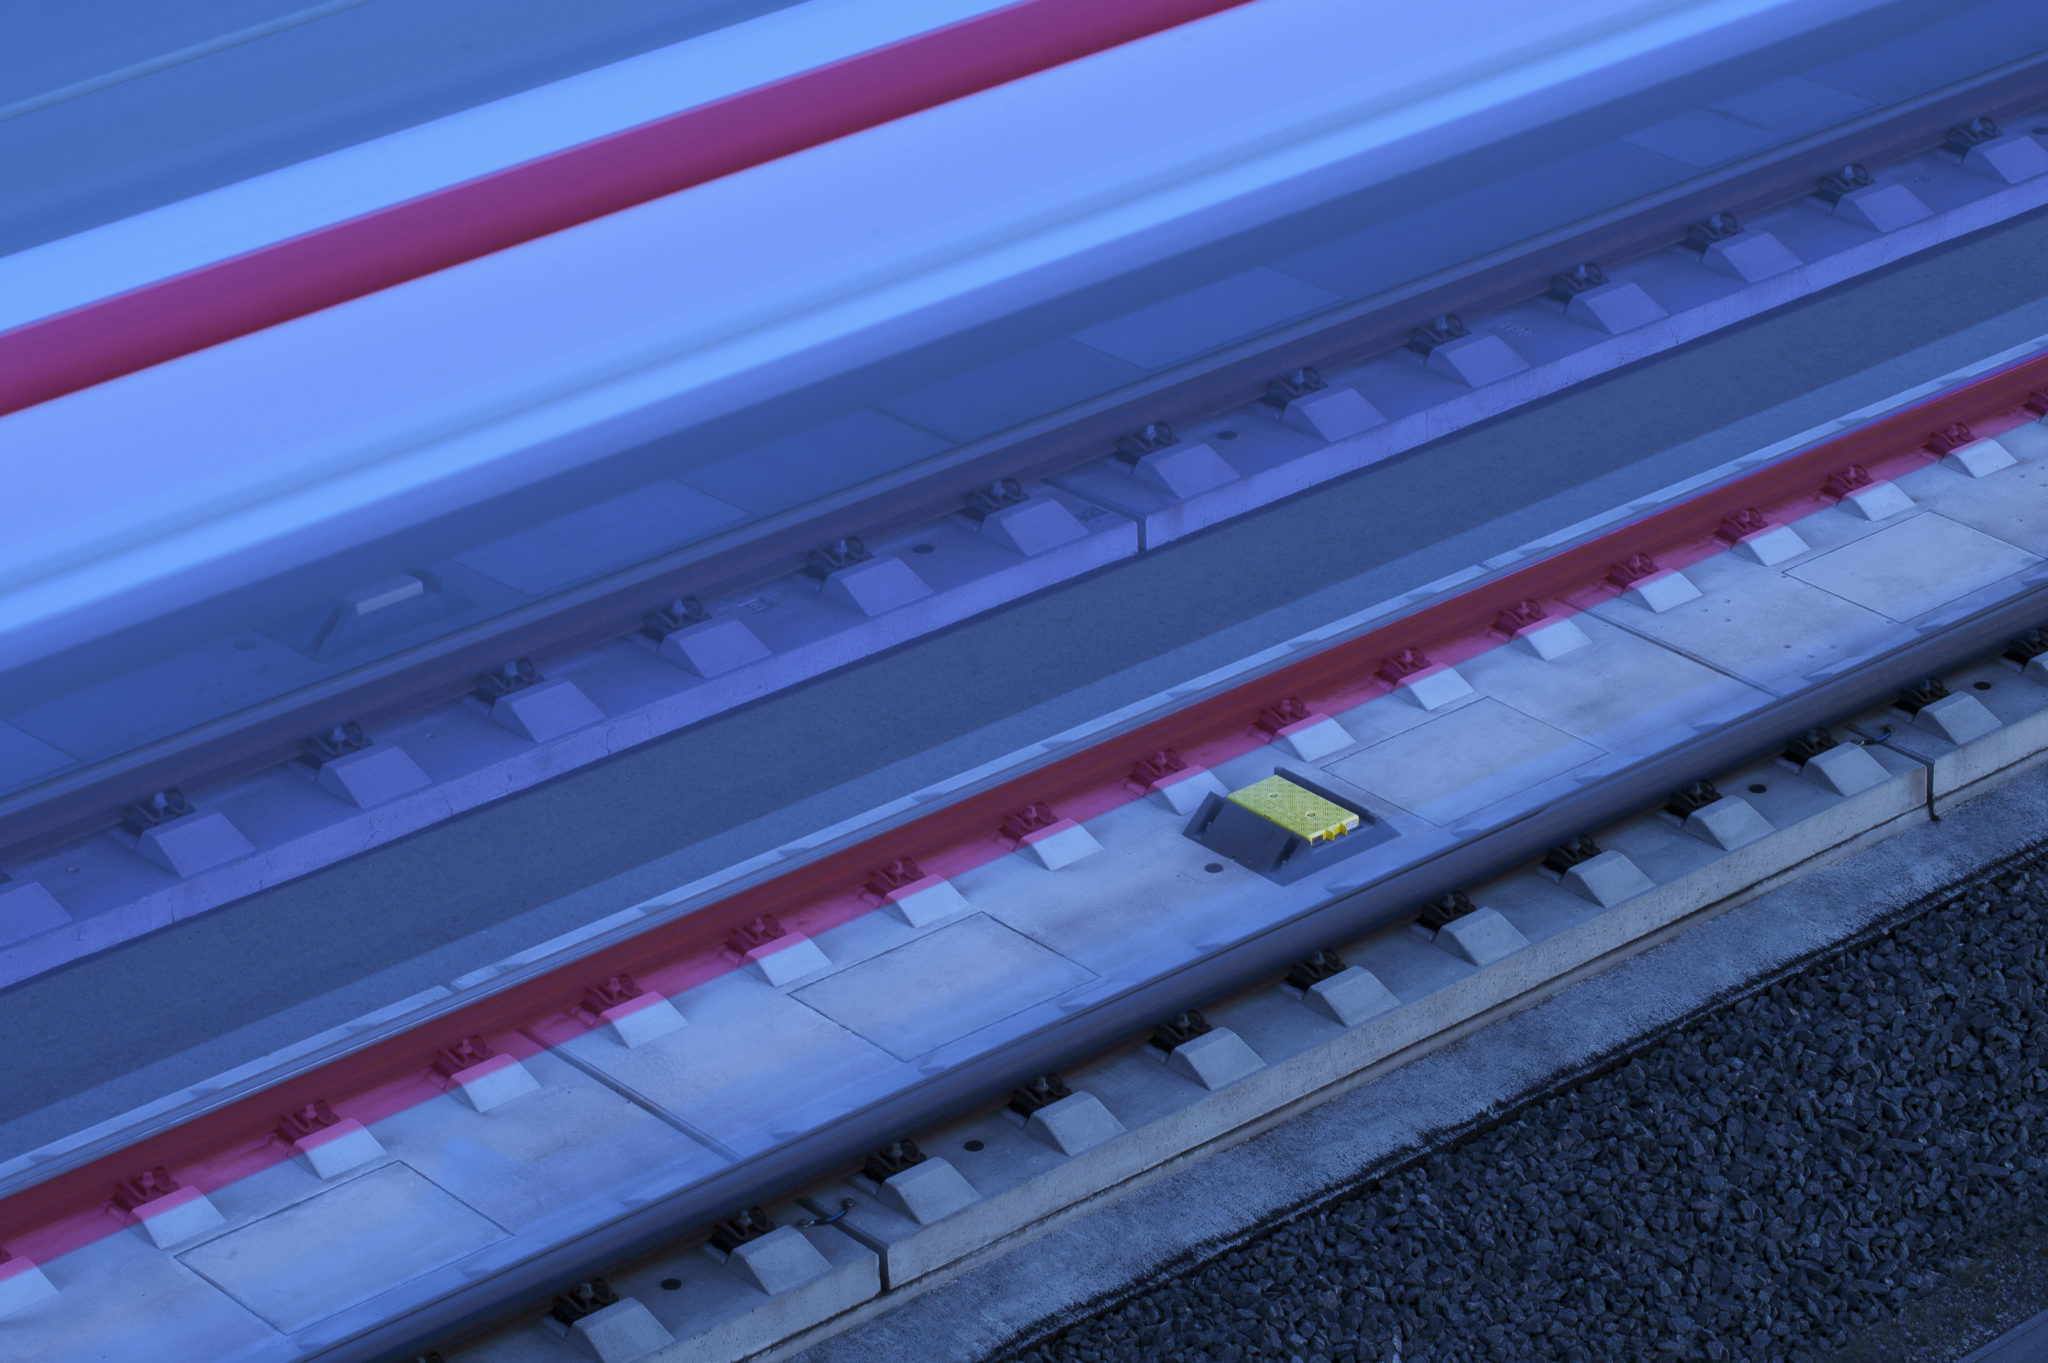 A eurobalise for ETCS allows the train to communicate with the track